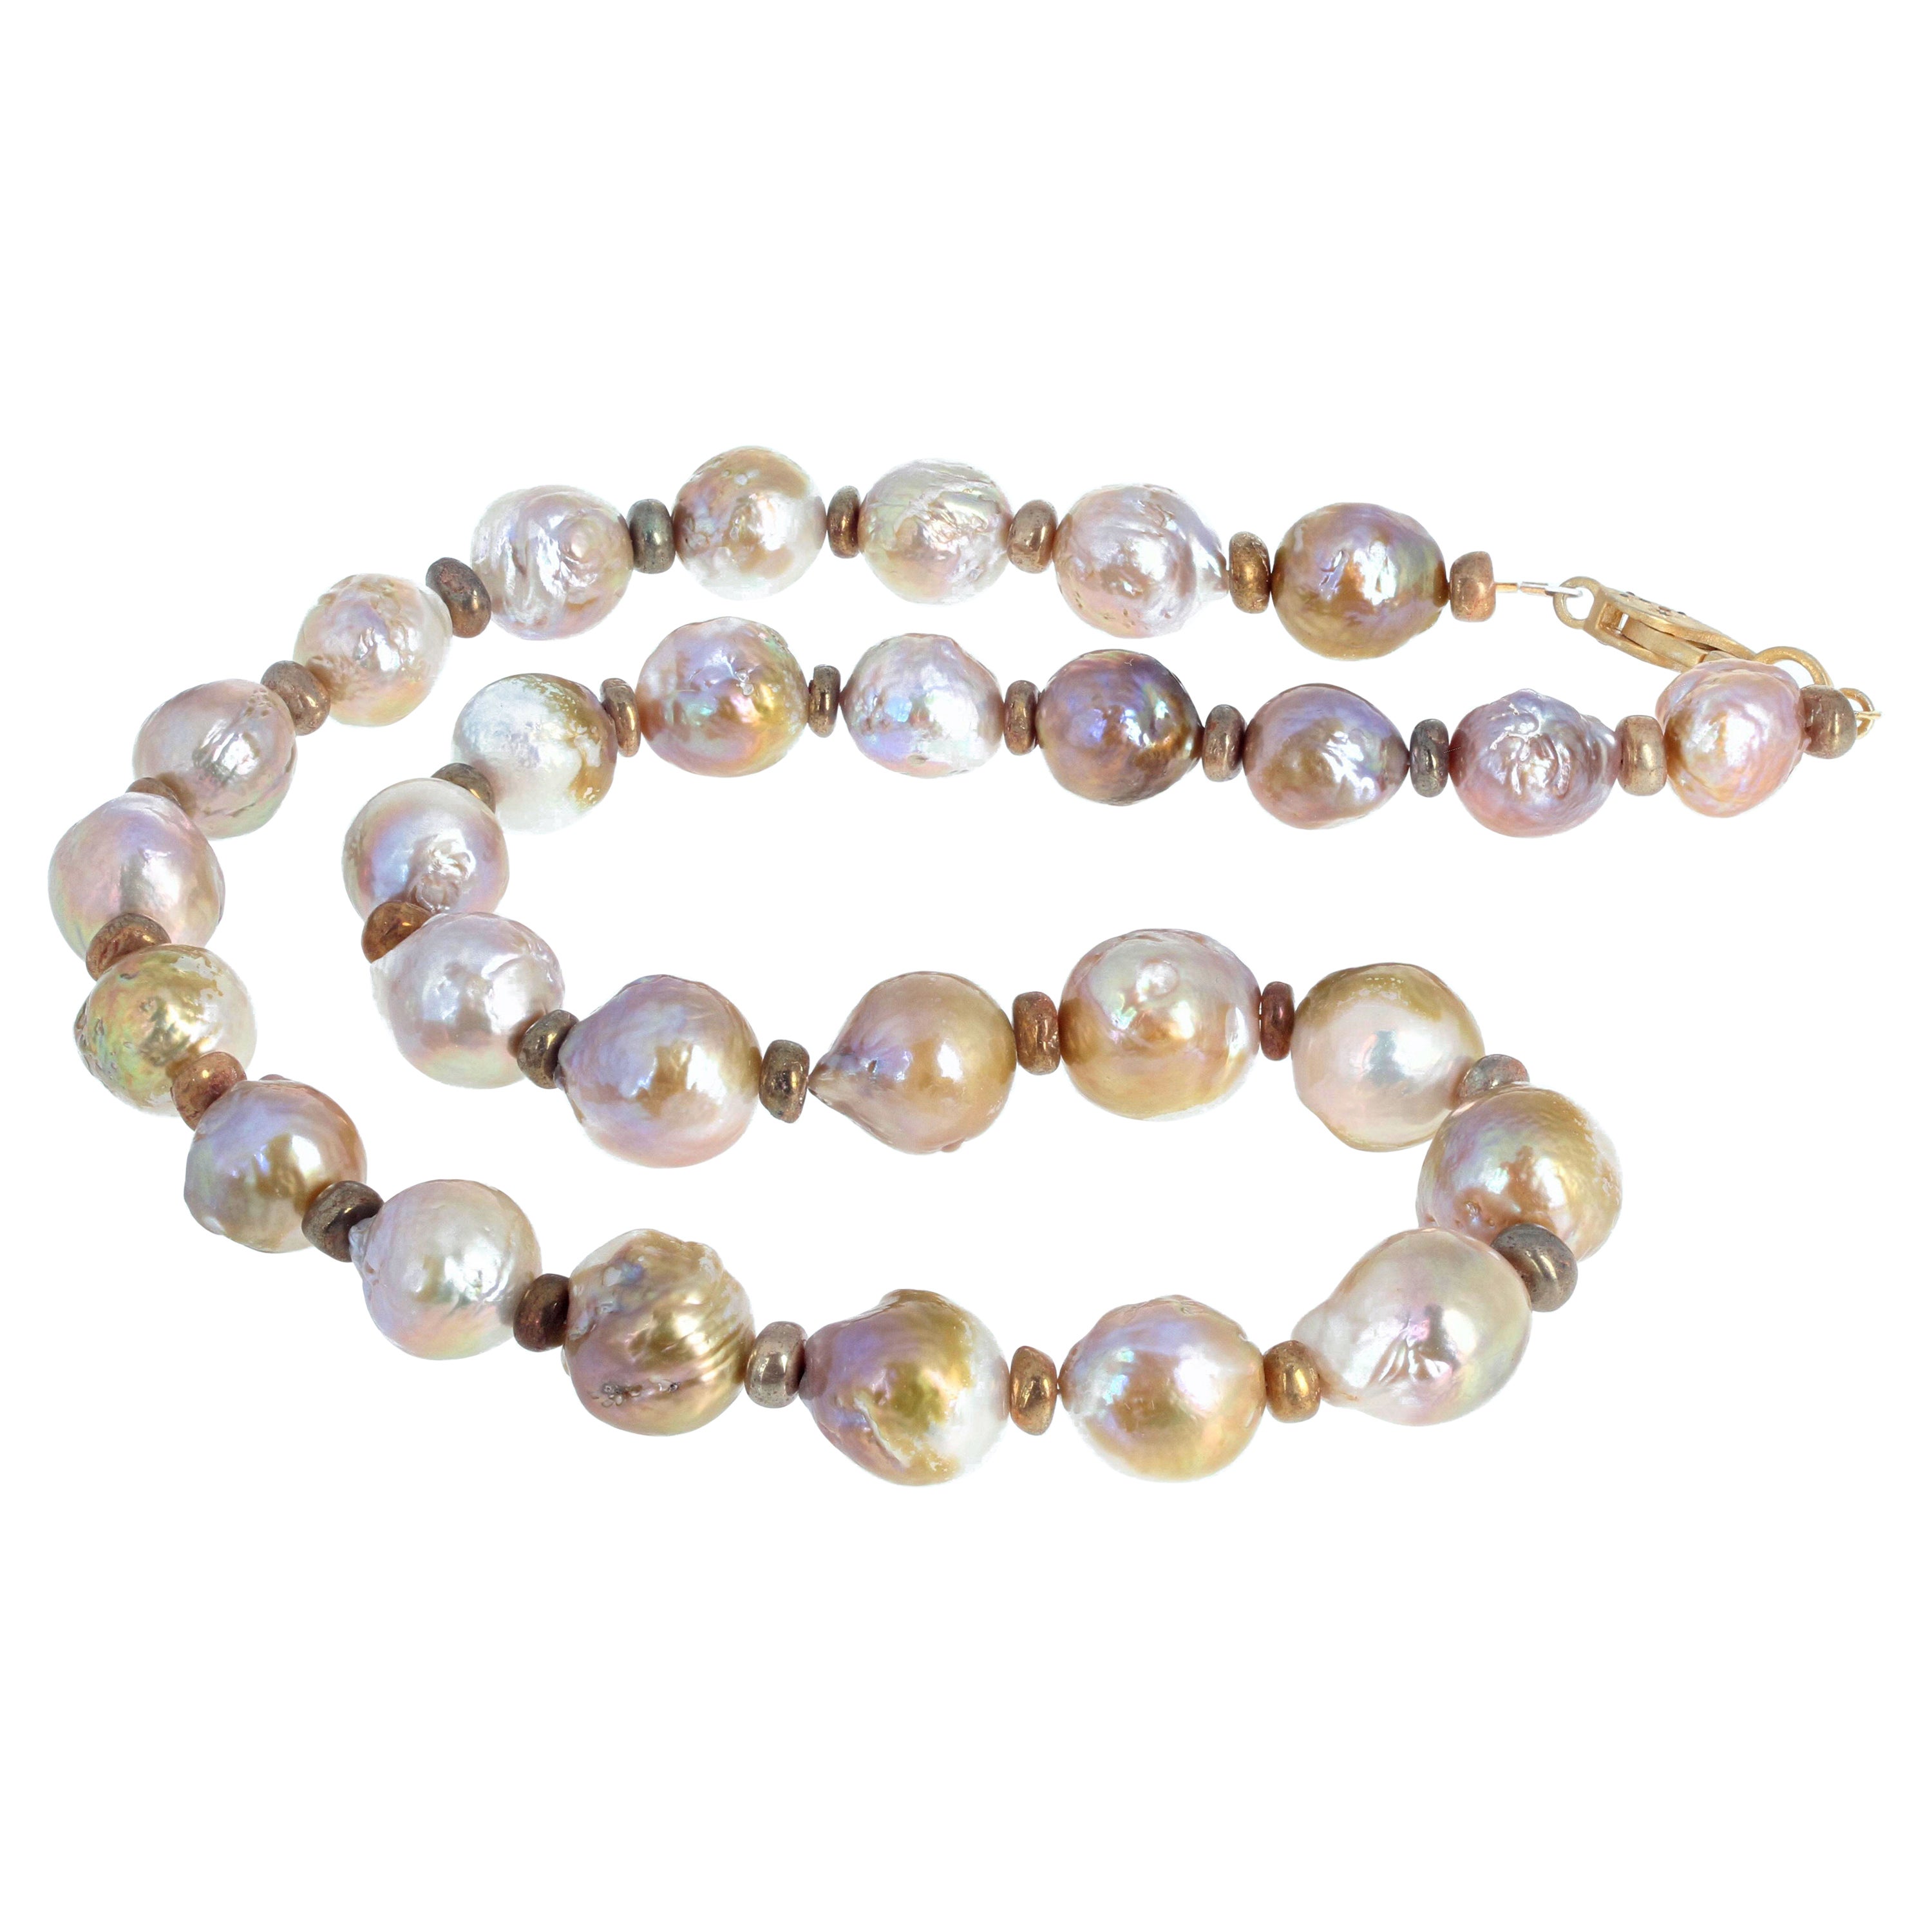 AJD Dramatic Real Goldy Glowing Cultured Ocean Pearl Collier